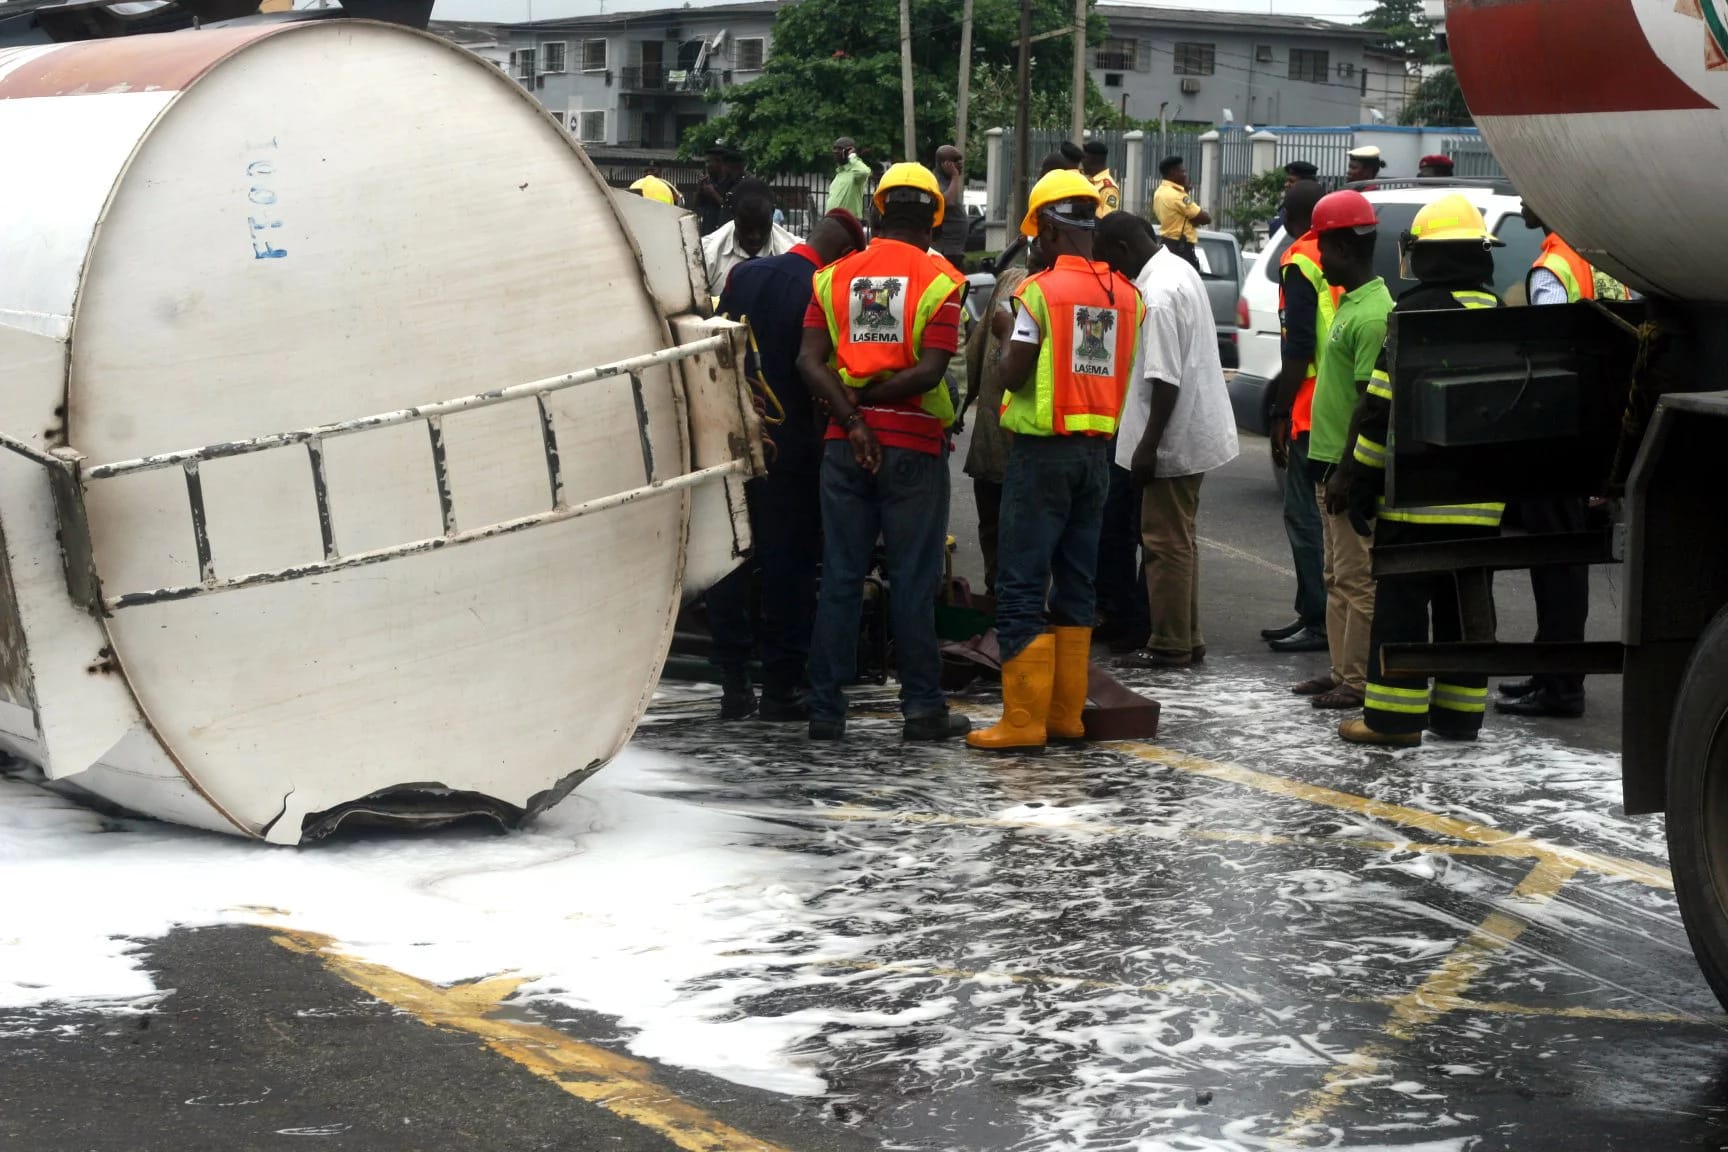 Two feared dead, another injured in Oshodi tanker fire